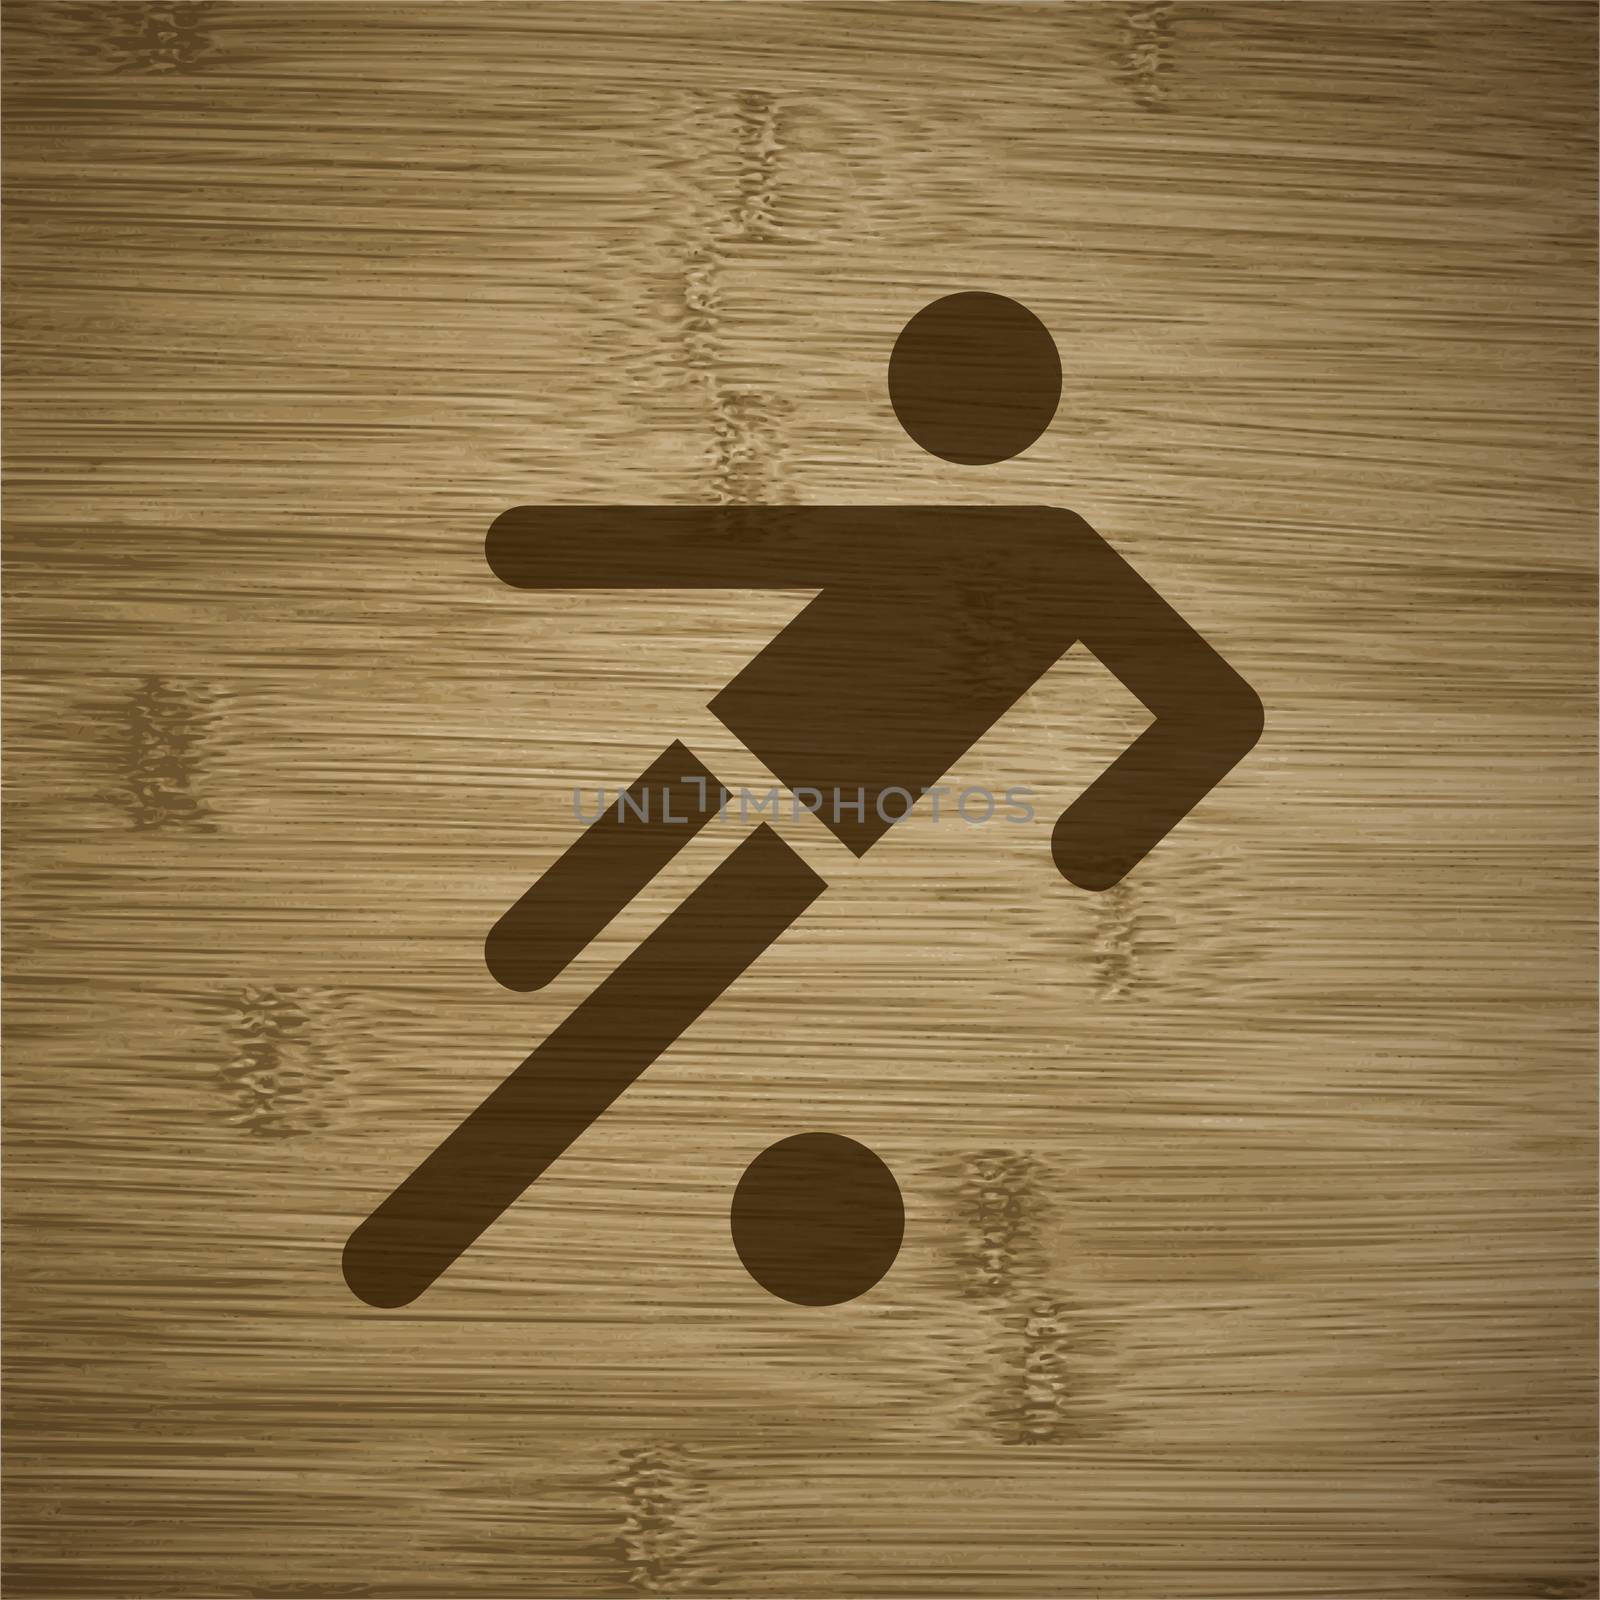 Soccer players icon. Football. Flat with abstract background by serhii_lohvyniuk